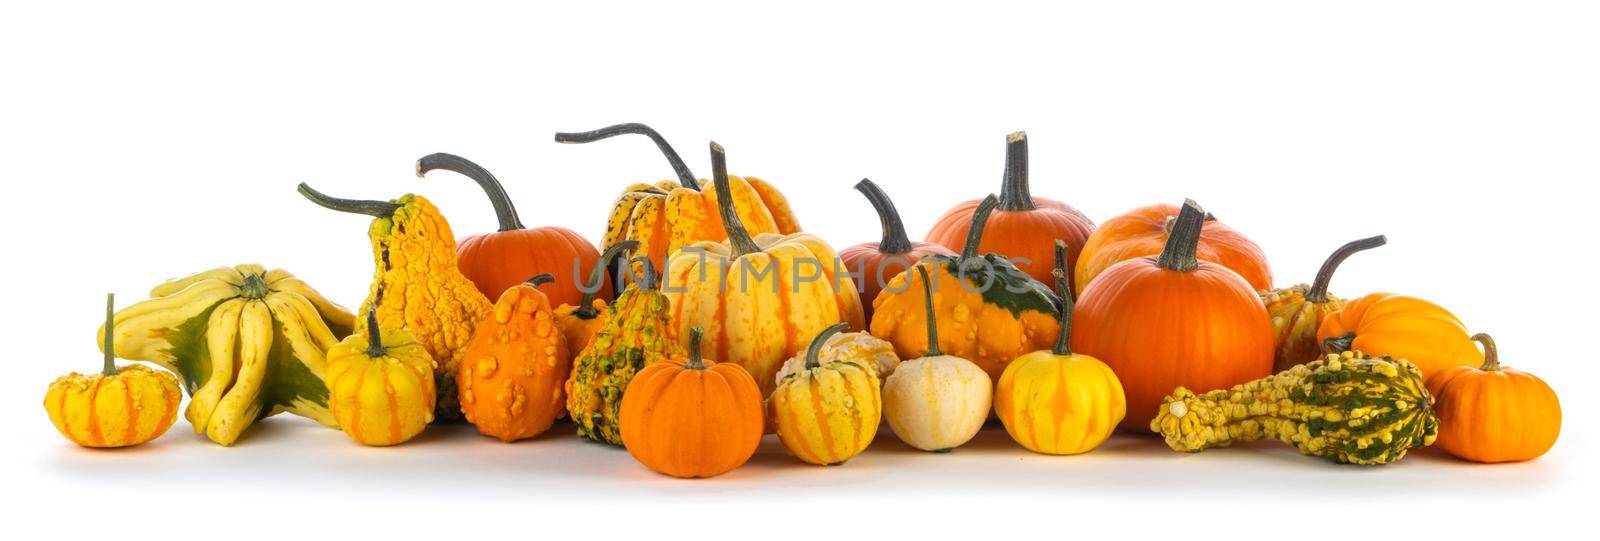 Many various pumpkins in a row isolated on white background, Halloween or Thanksgiving day concept